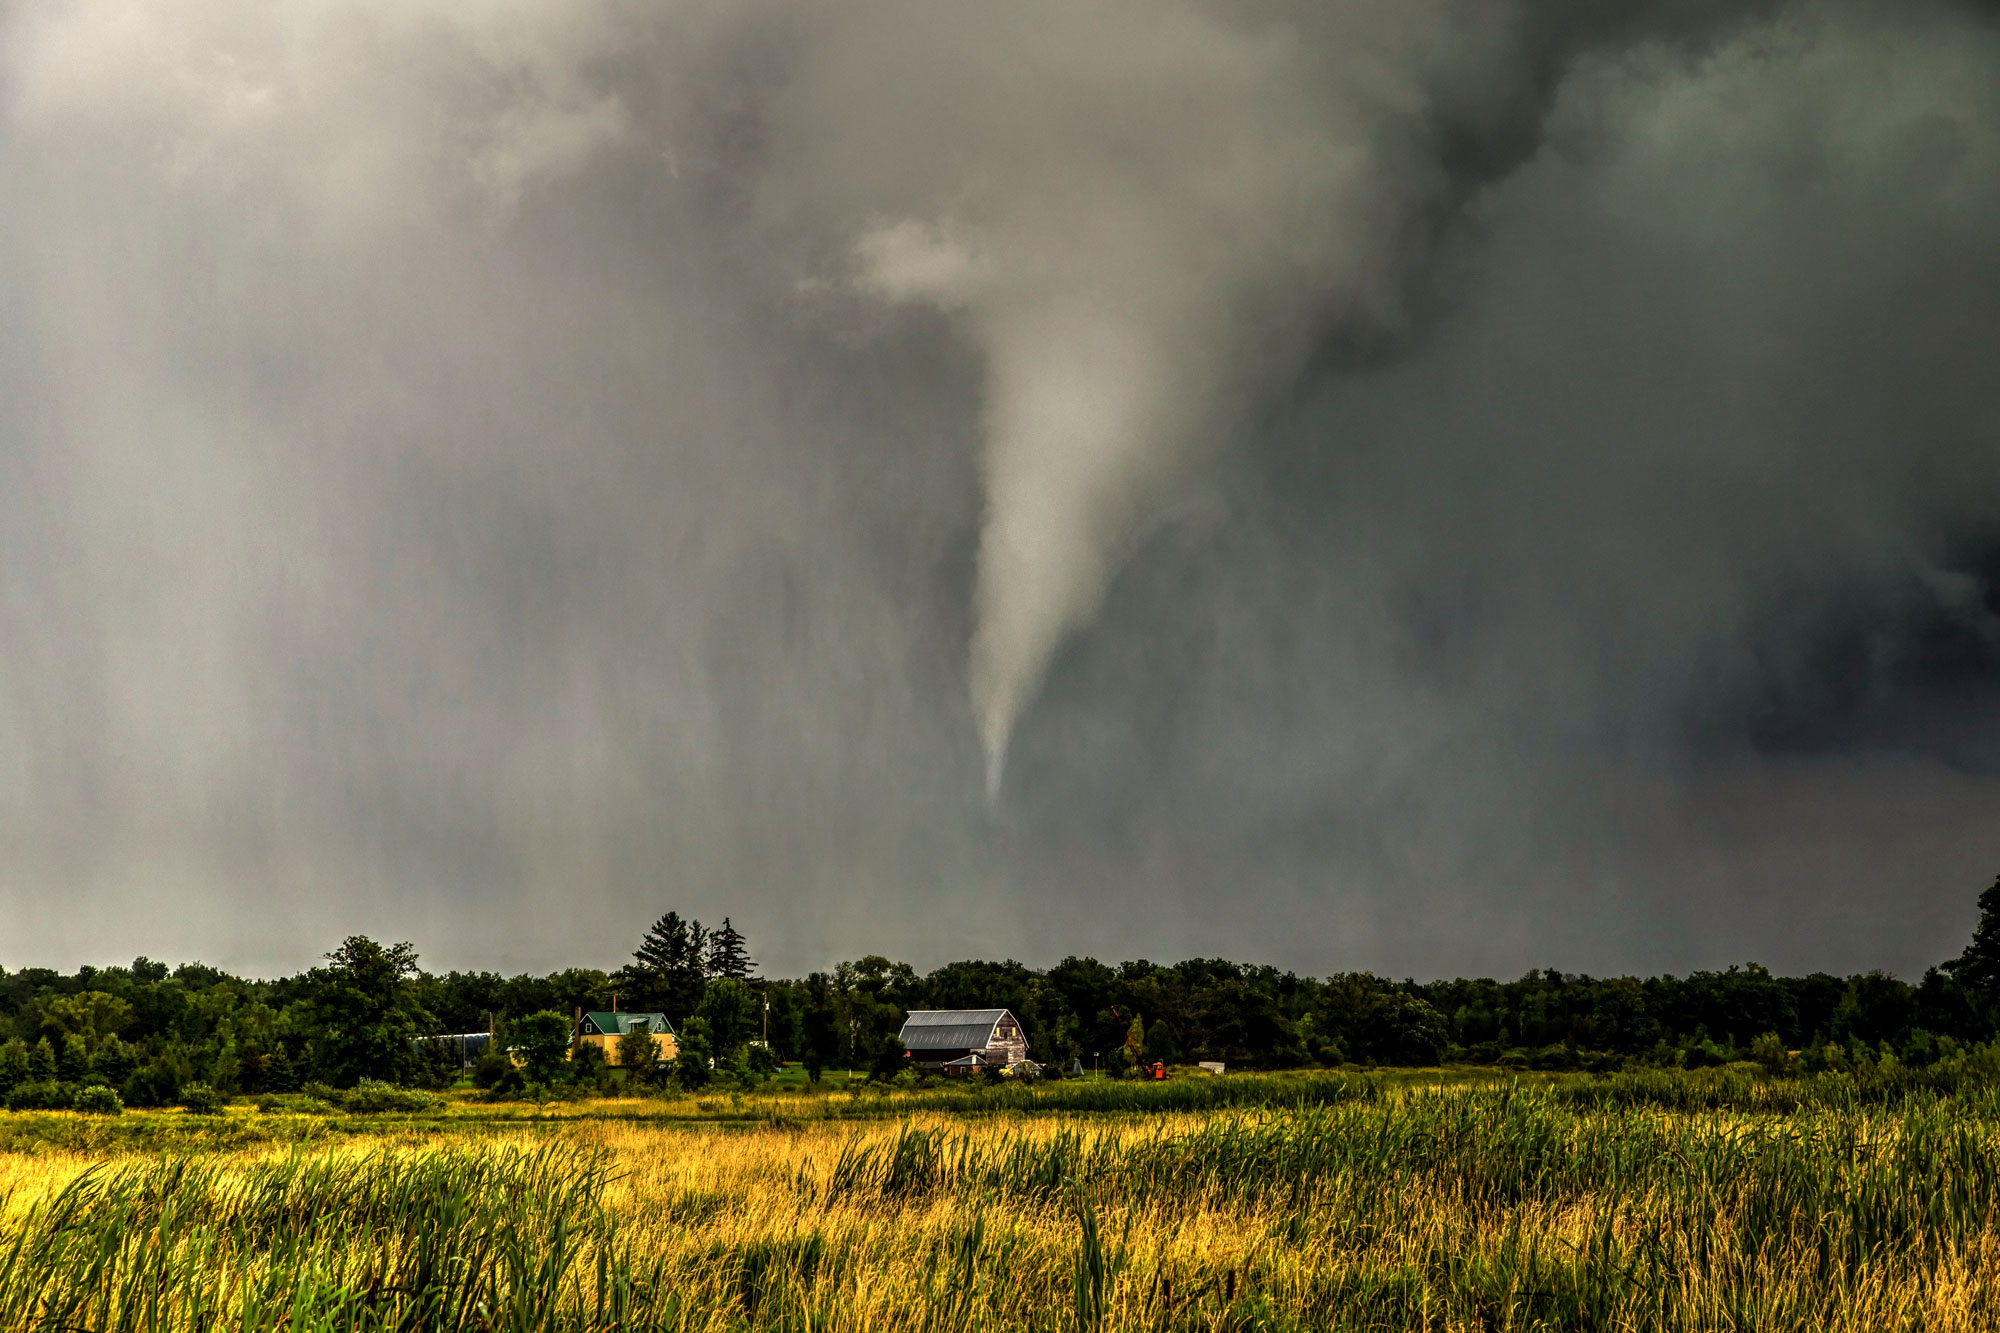 Photograph of a tornado in Benton County, Minnesota. The photos shows a field of cattails in the foreground, with trees and houses on the horizon. Above them, the sky is cloudy, with a funnel cloud extending down above the trees and houses but not touching the ground.